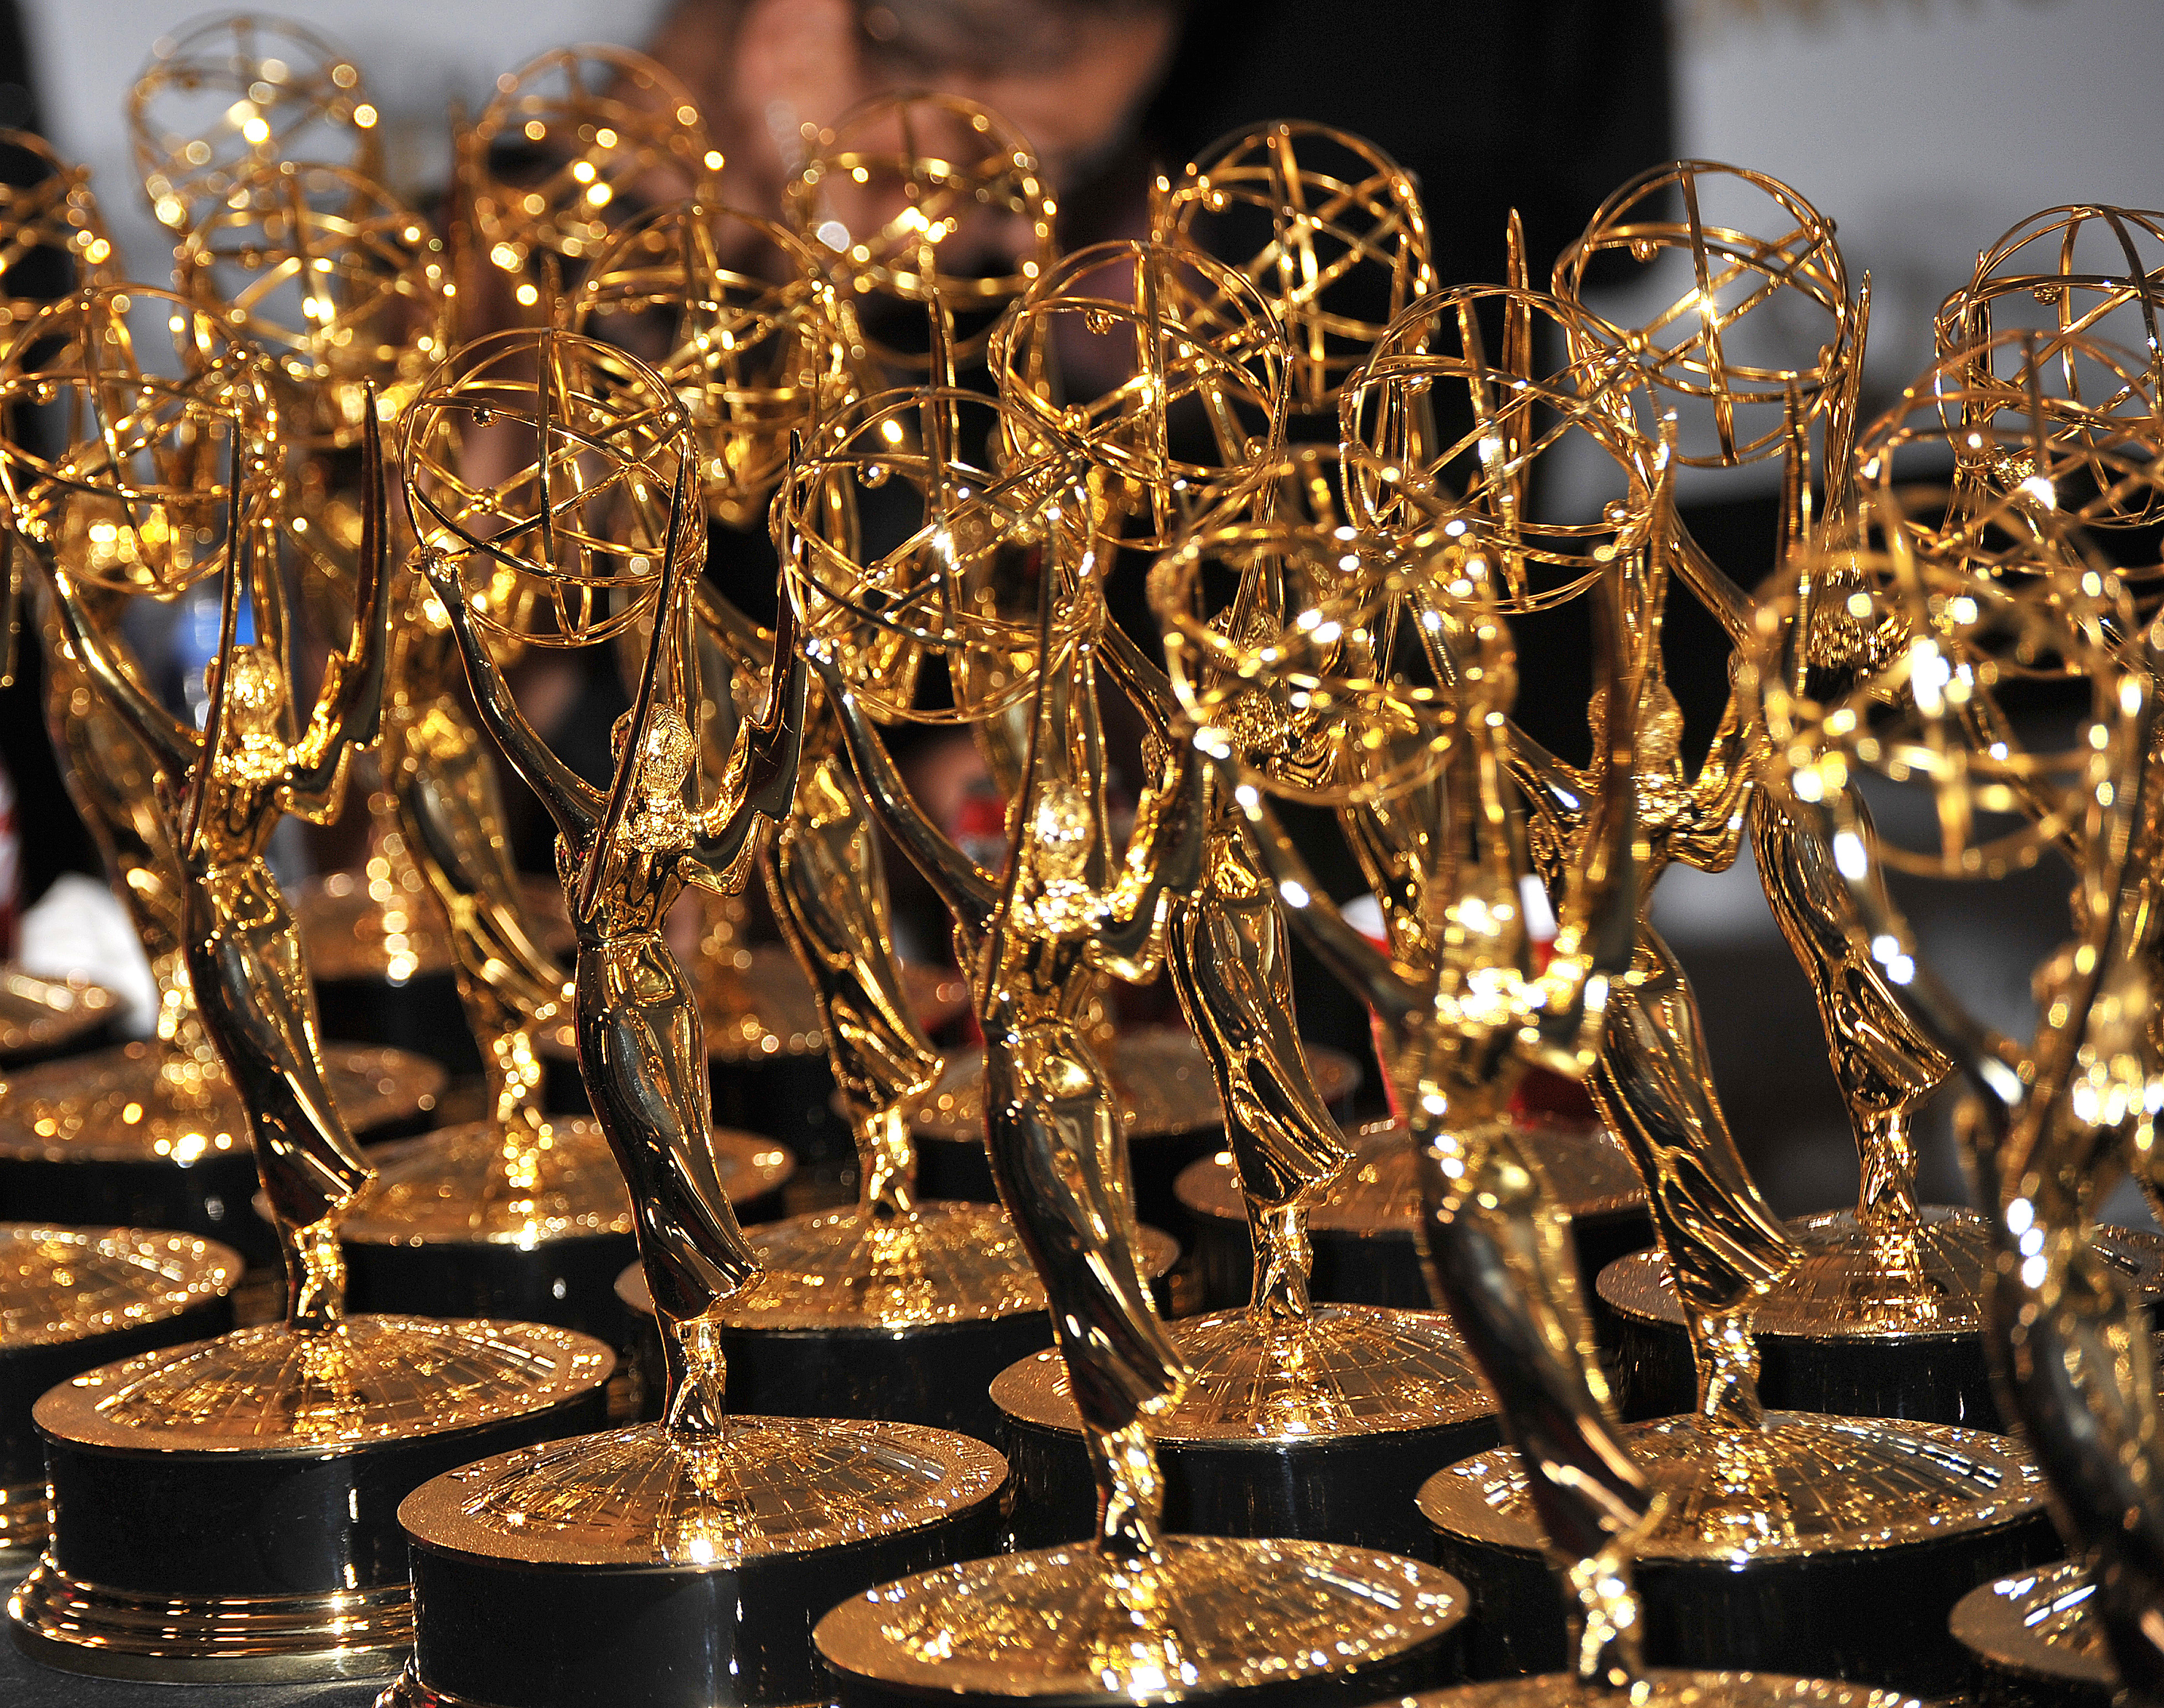 Emmy Awards 2020 Streaming: How to Watch Online Live